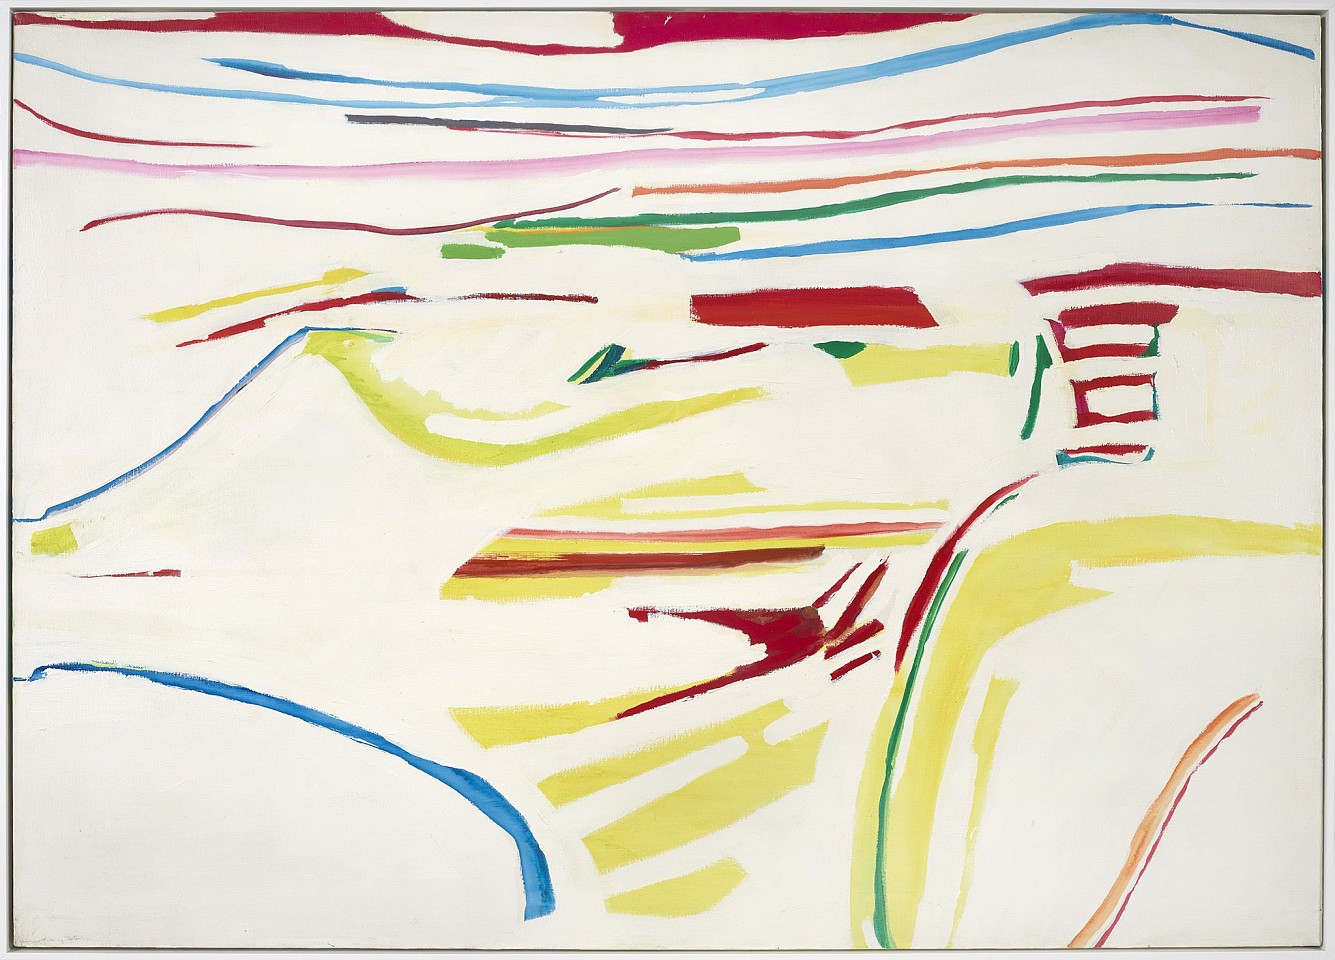 Yvonne Pickering Carter, Untitled, c. 1973
Oil on canvas, 46 x 64 5/8 in. (116.8 x 164.2 cm)
YPC-00008